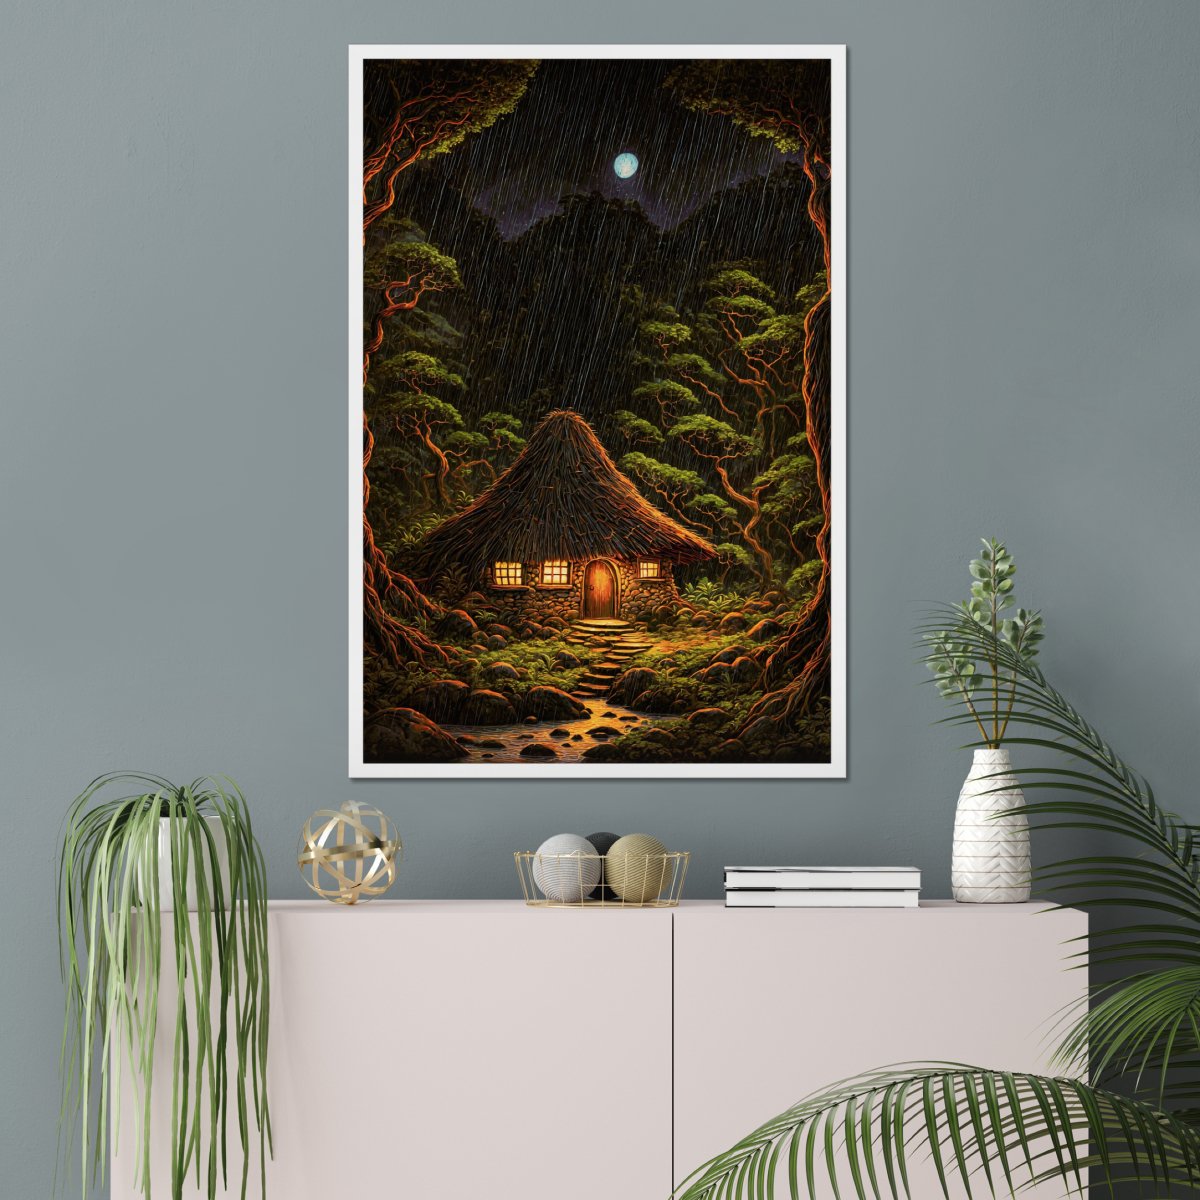 Dark roots isle - Art print - Poster - Ever colorful